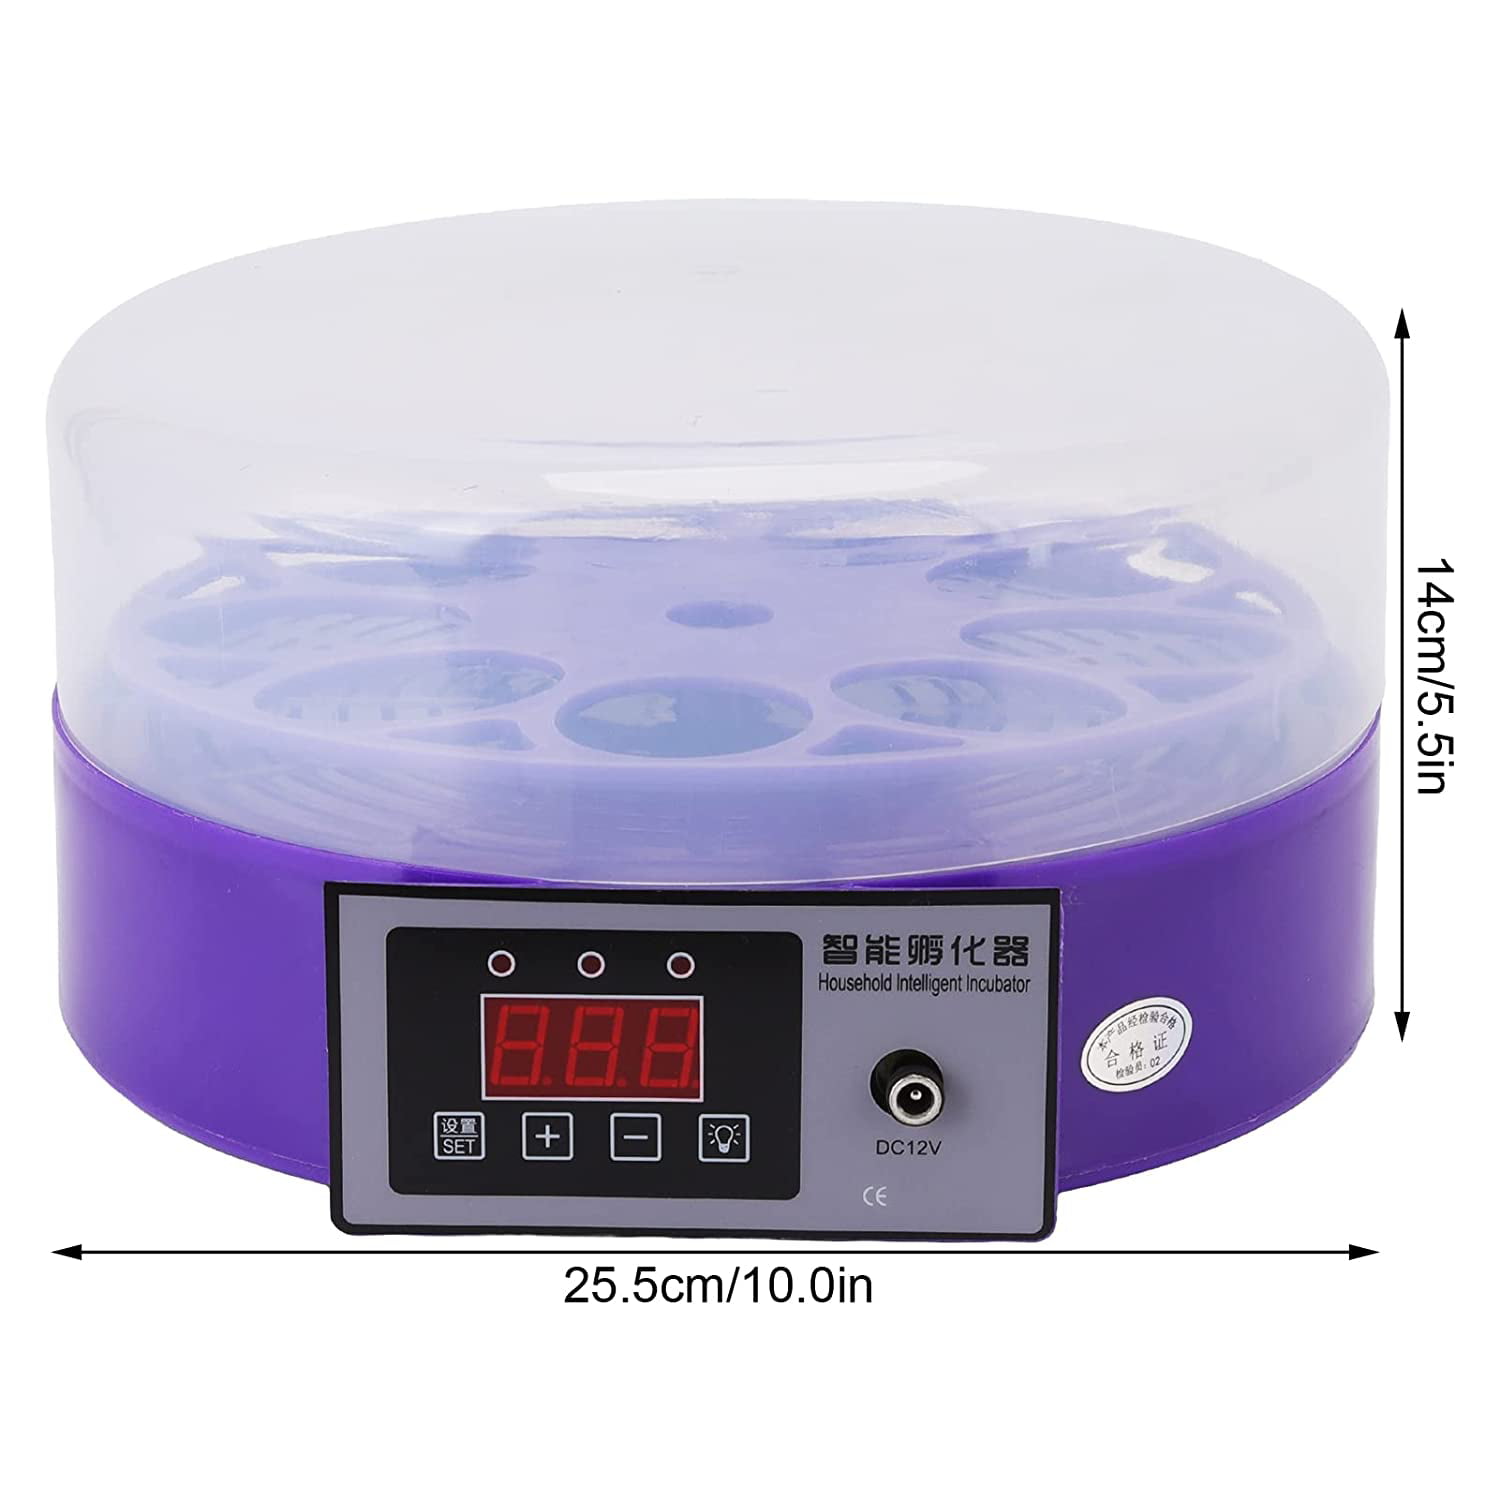 Incubator Warehouse Digital Egg Scale Accurate Humidity Measurement and Egg Sizing 